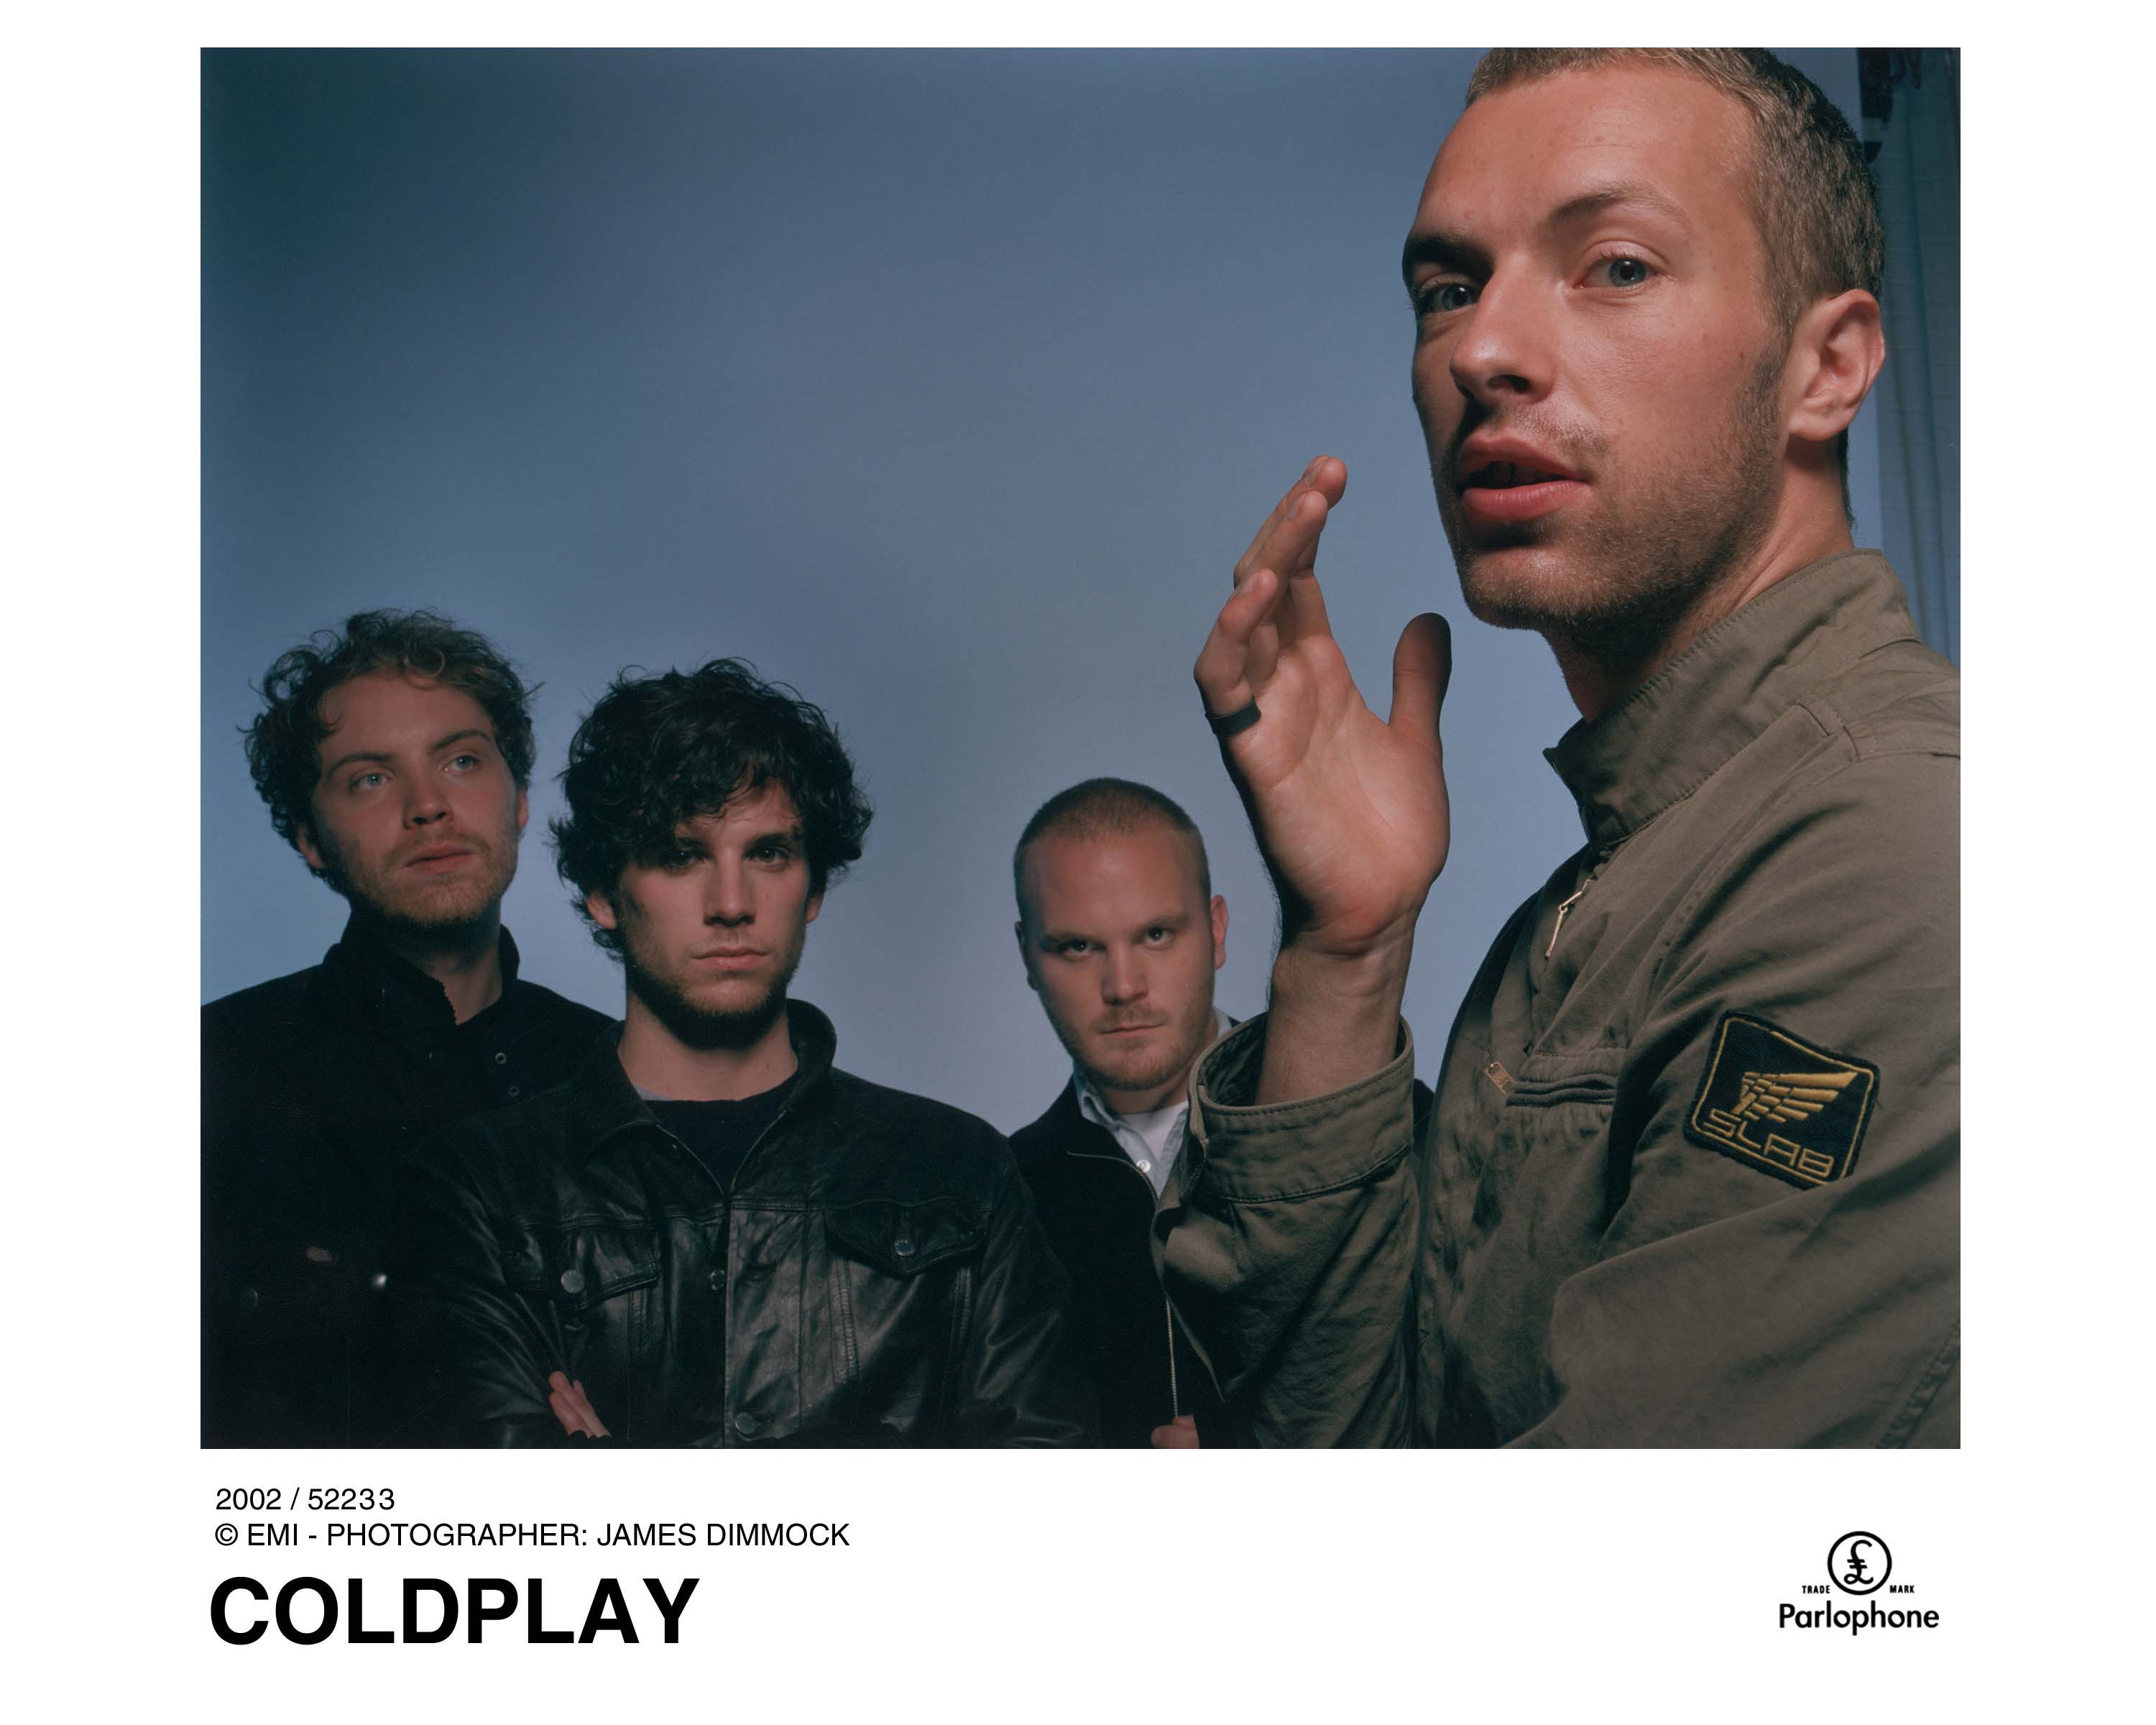 COLDPLAY: Guitarist Jon Buckland, bassist Guy Berryman, drummer Will Champion, singer/keyboards/guitarist Chris Martin. [Photo by JAMES DIMMOCK used by permission of Capitol Records.]